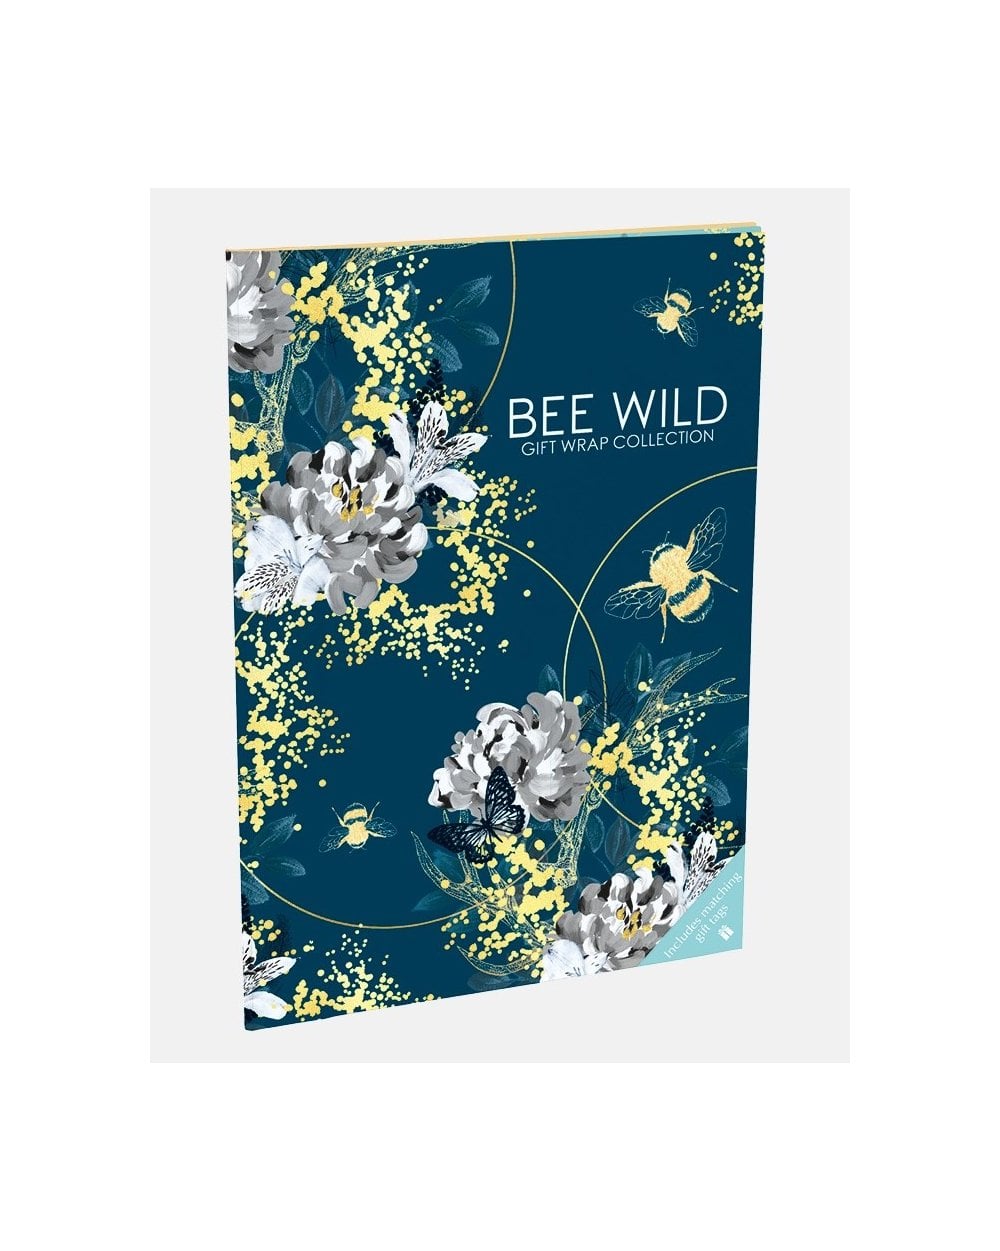 Bee Wild Gift Wrap Collection Book